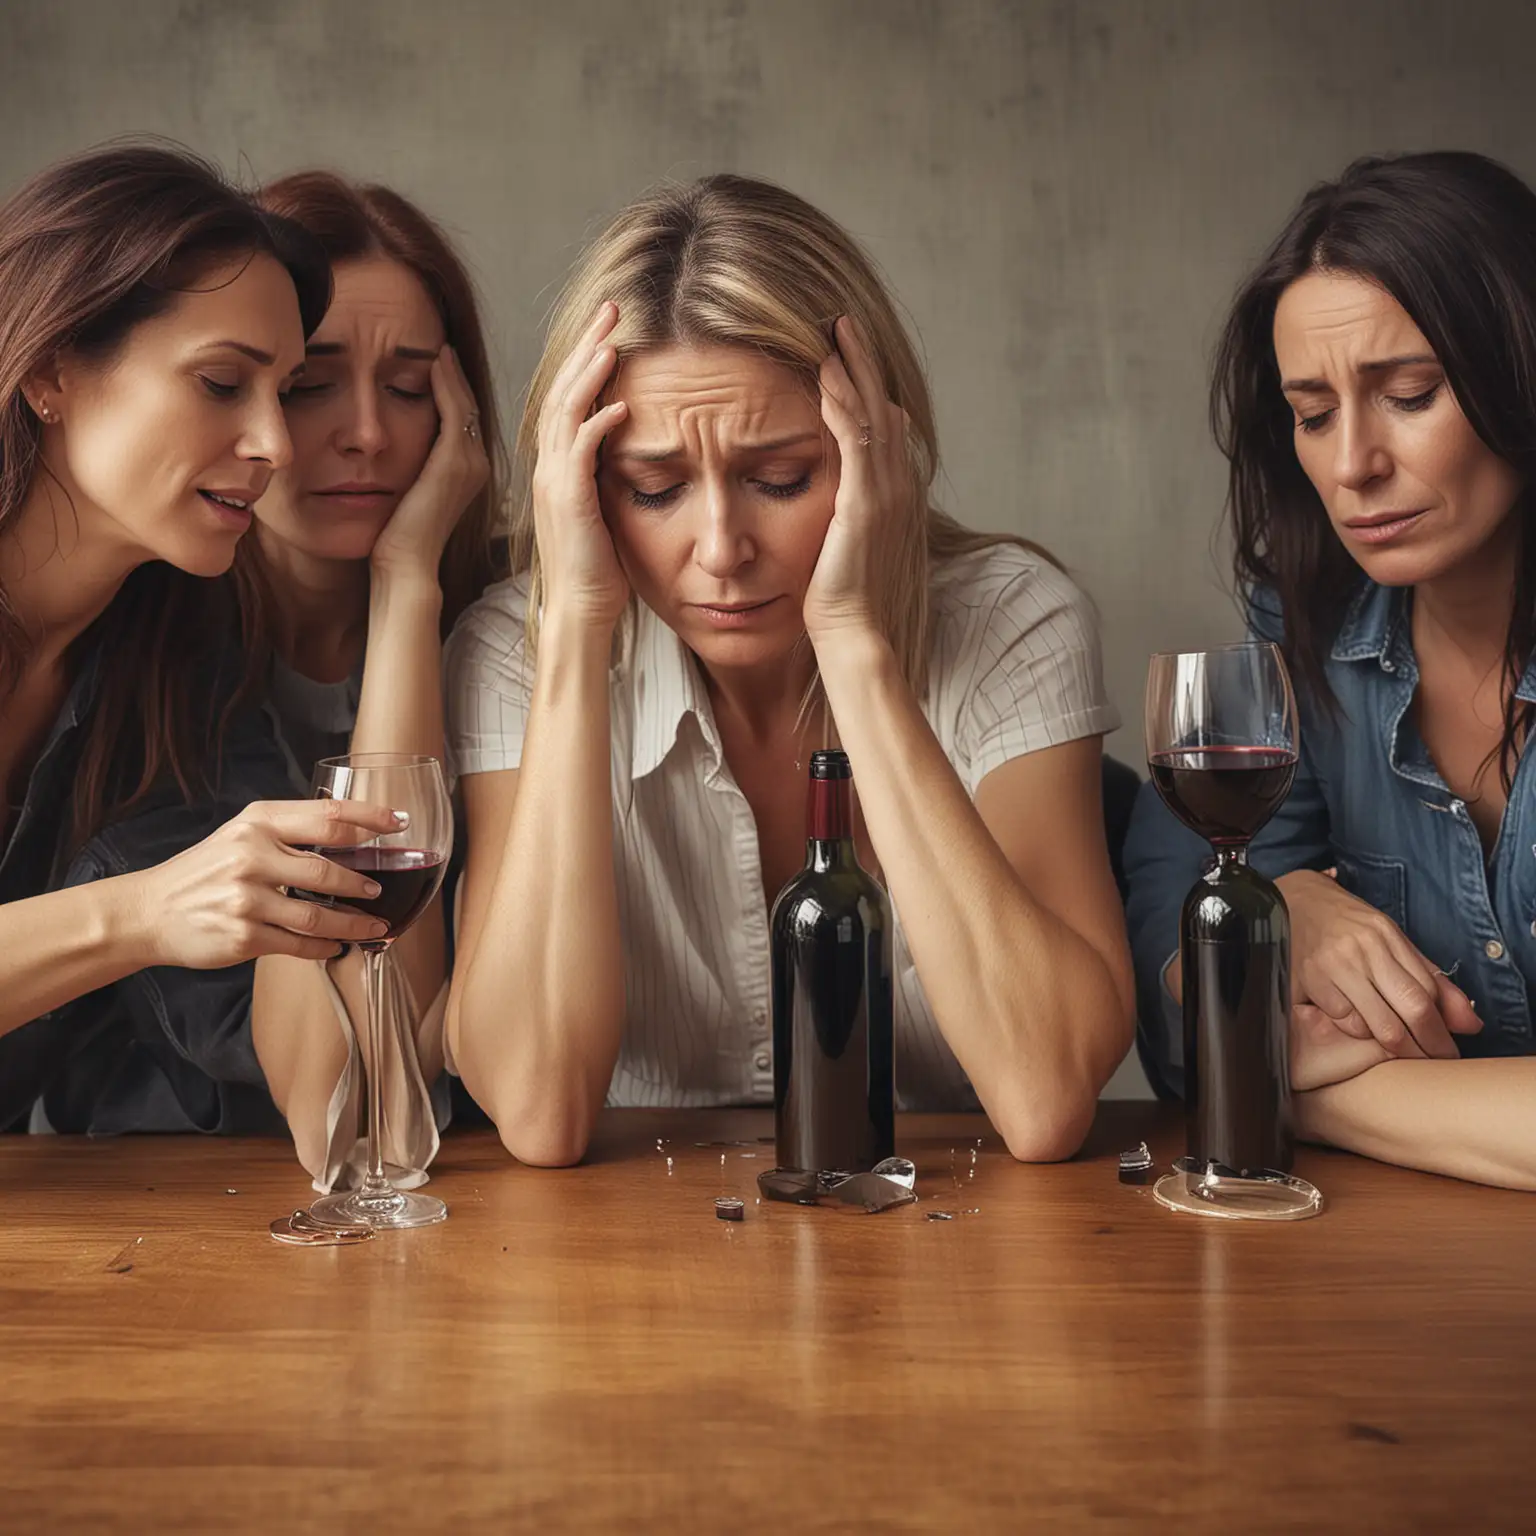 MiddleAged Woman in Despair Sharing Wine with Friends